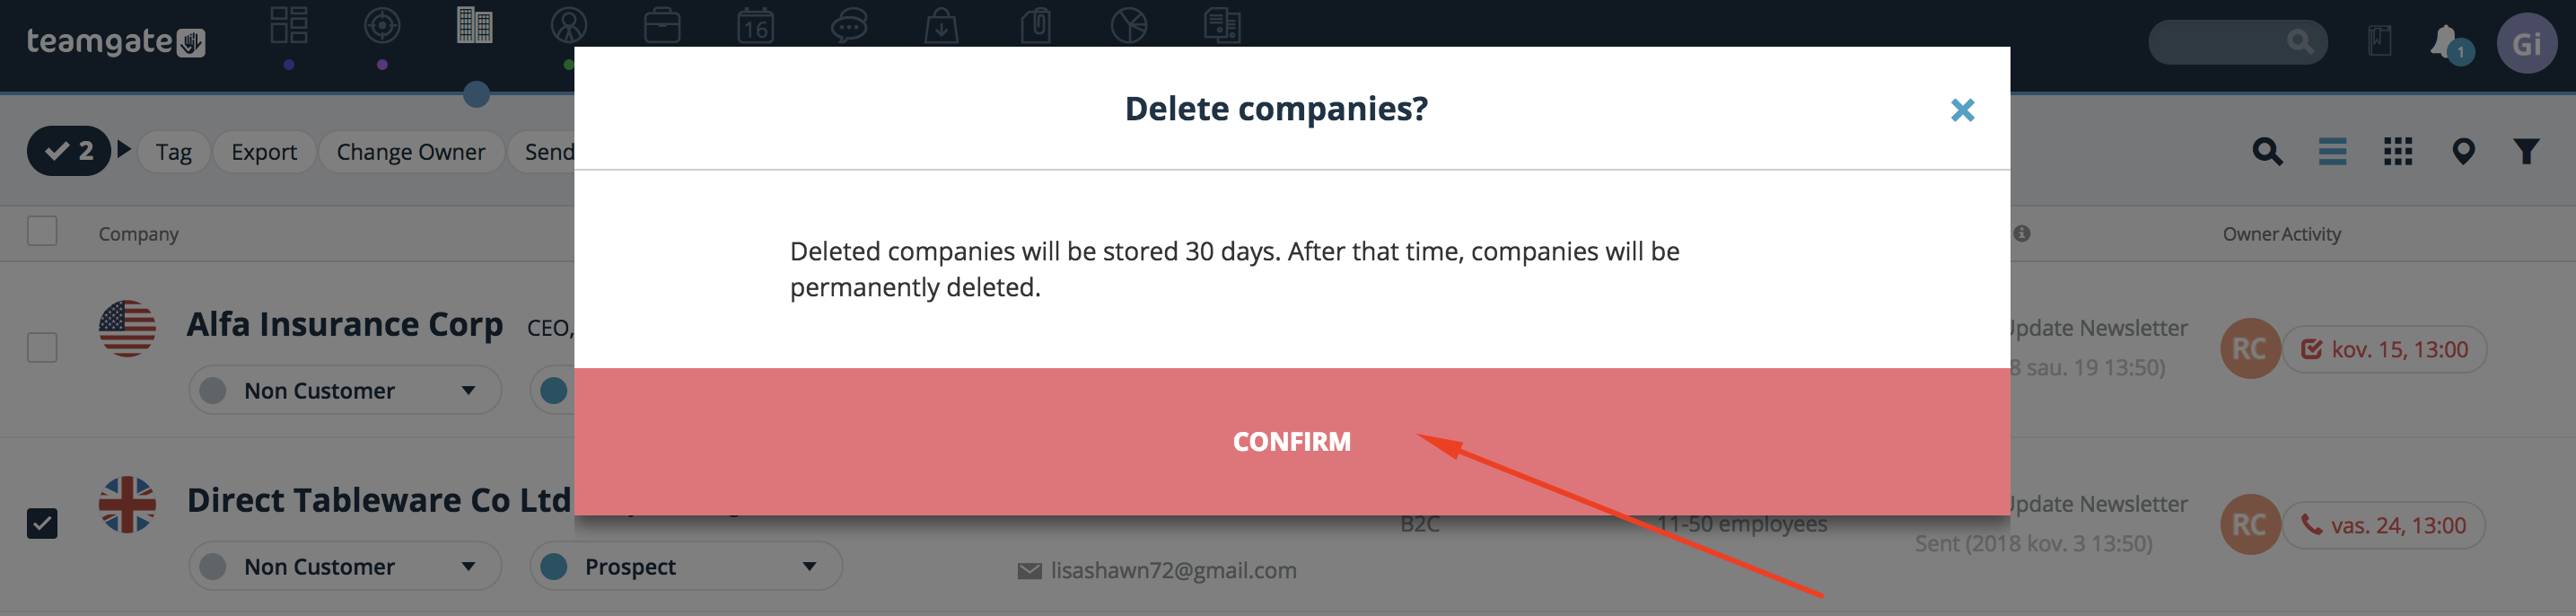 delete-companies-confirm-Teamgate.png